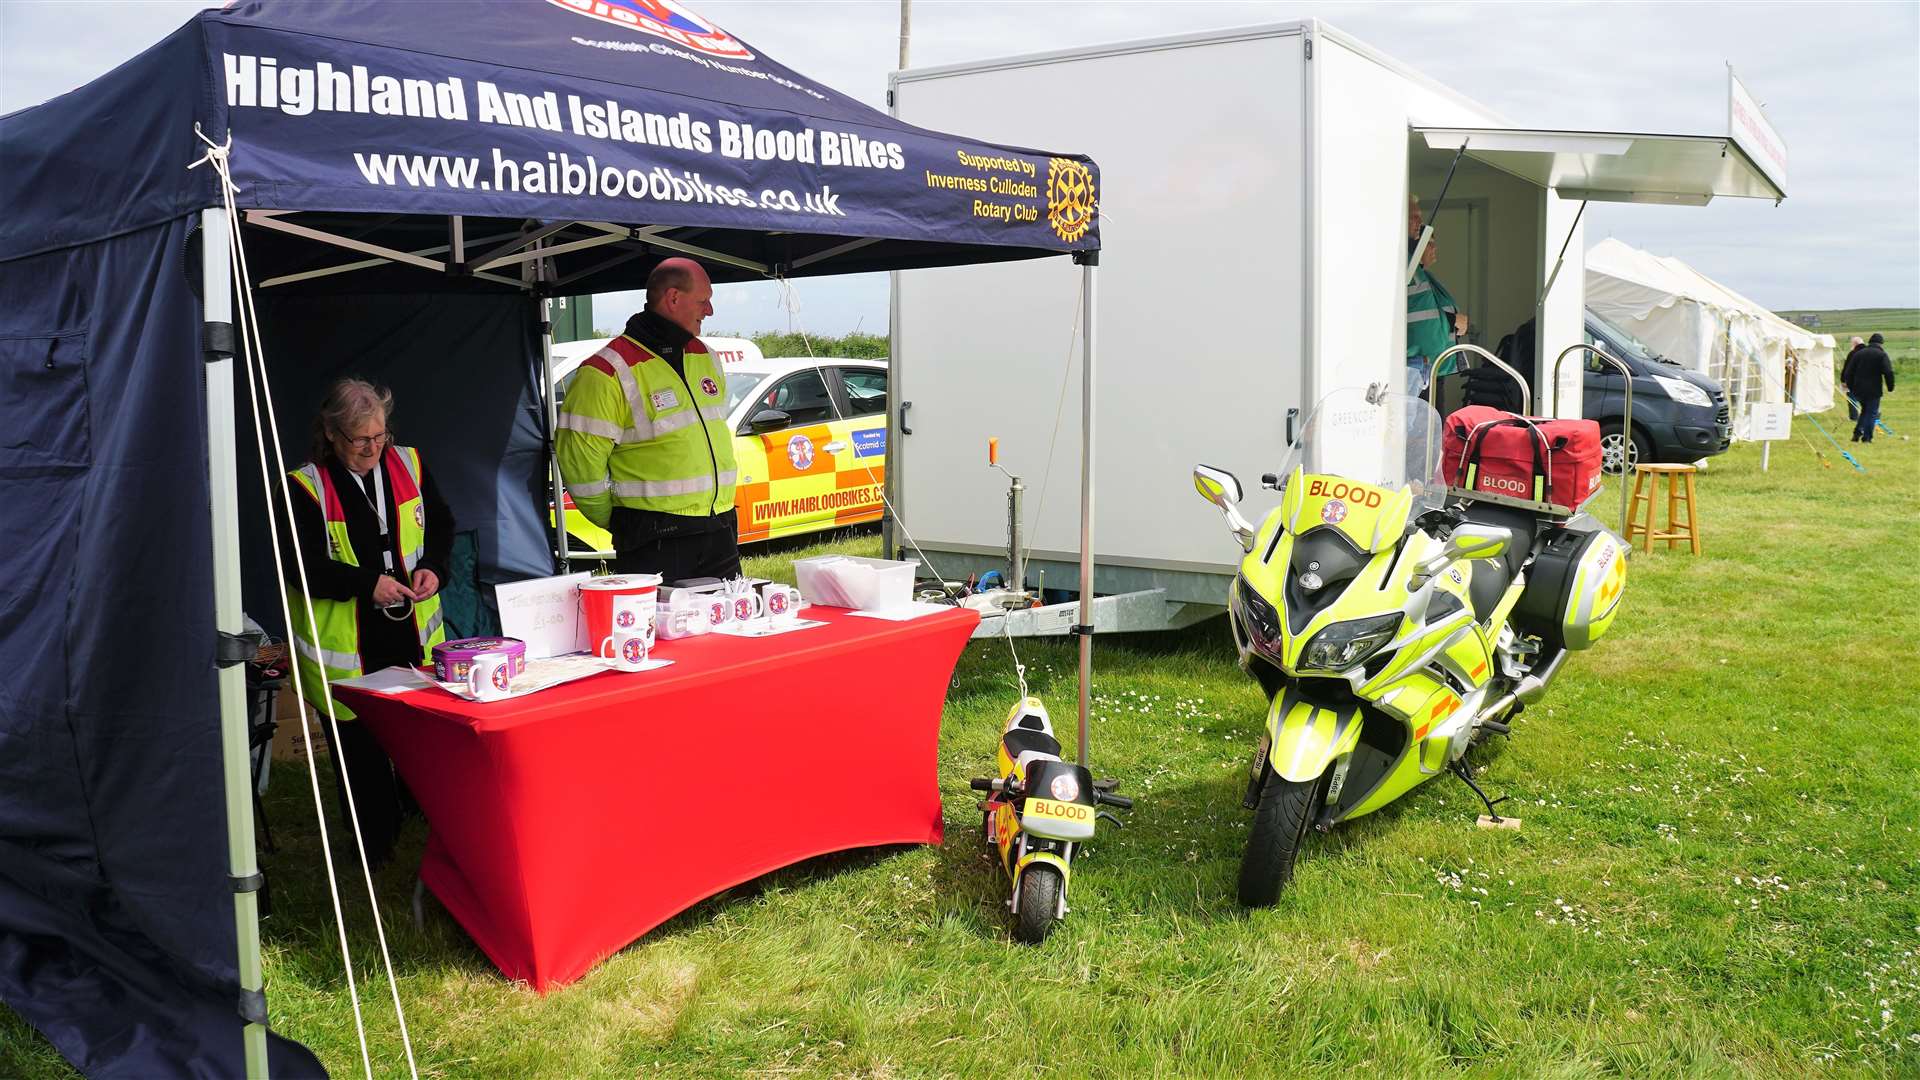 Blood Bikes were at the event to talk about their lifesaving work. The Highlands and Islands Blood Bikes volunteers transfer samples across NHS hospitals, care homes and GP surgeries. Picture: DGS